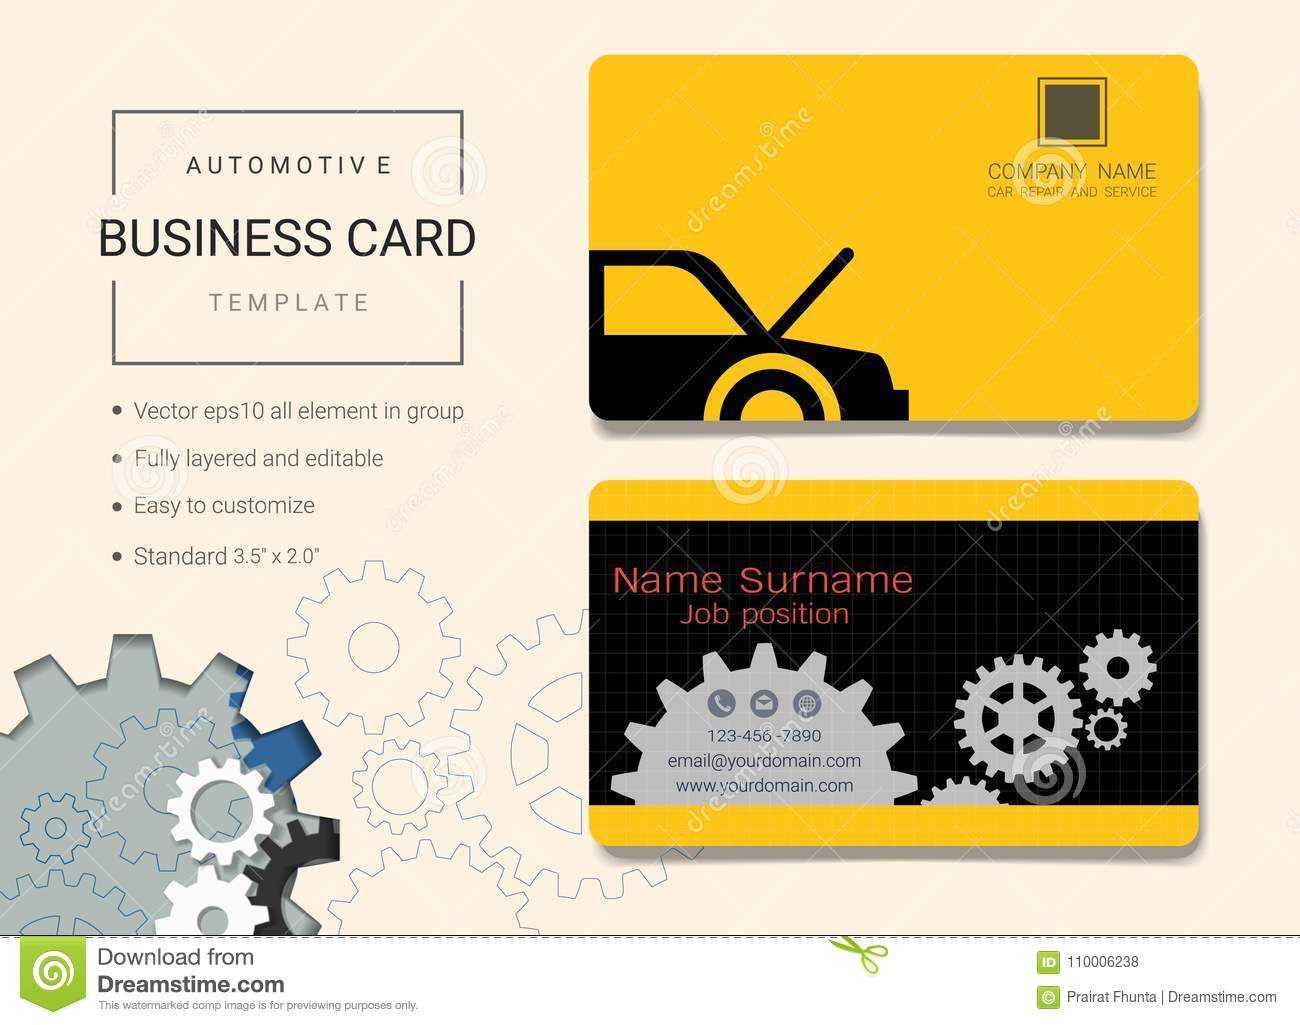 Automotive Business Card Or Name Card Template. Stock Vector With Regard To Automotive Business Card Templates